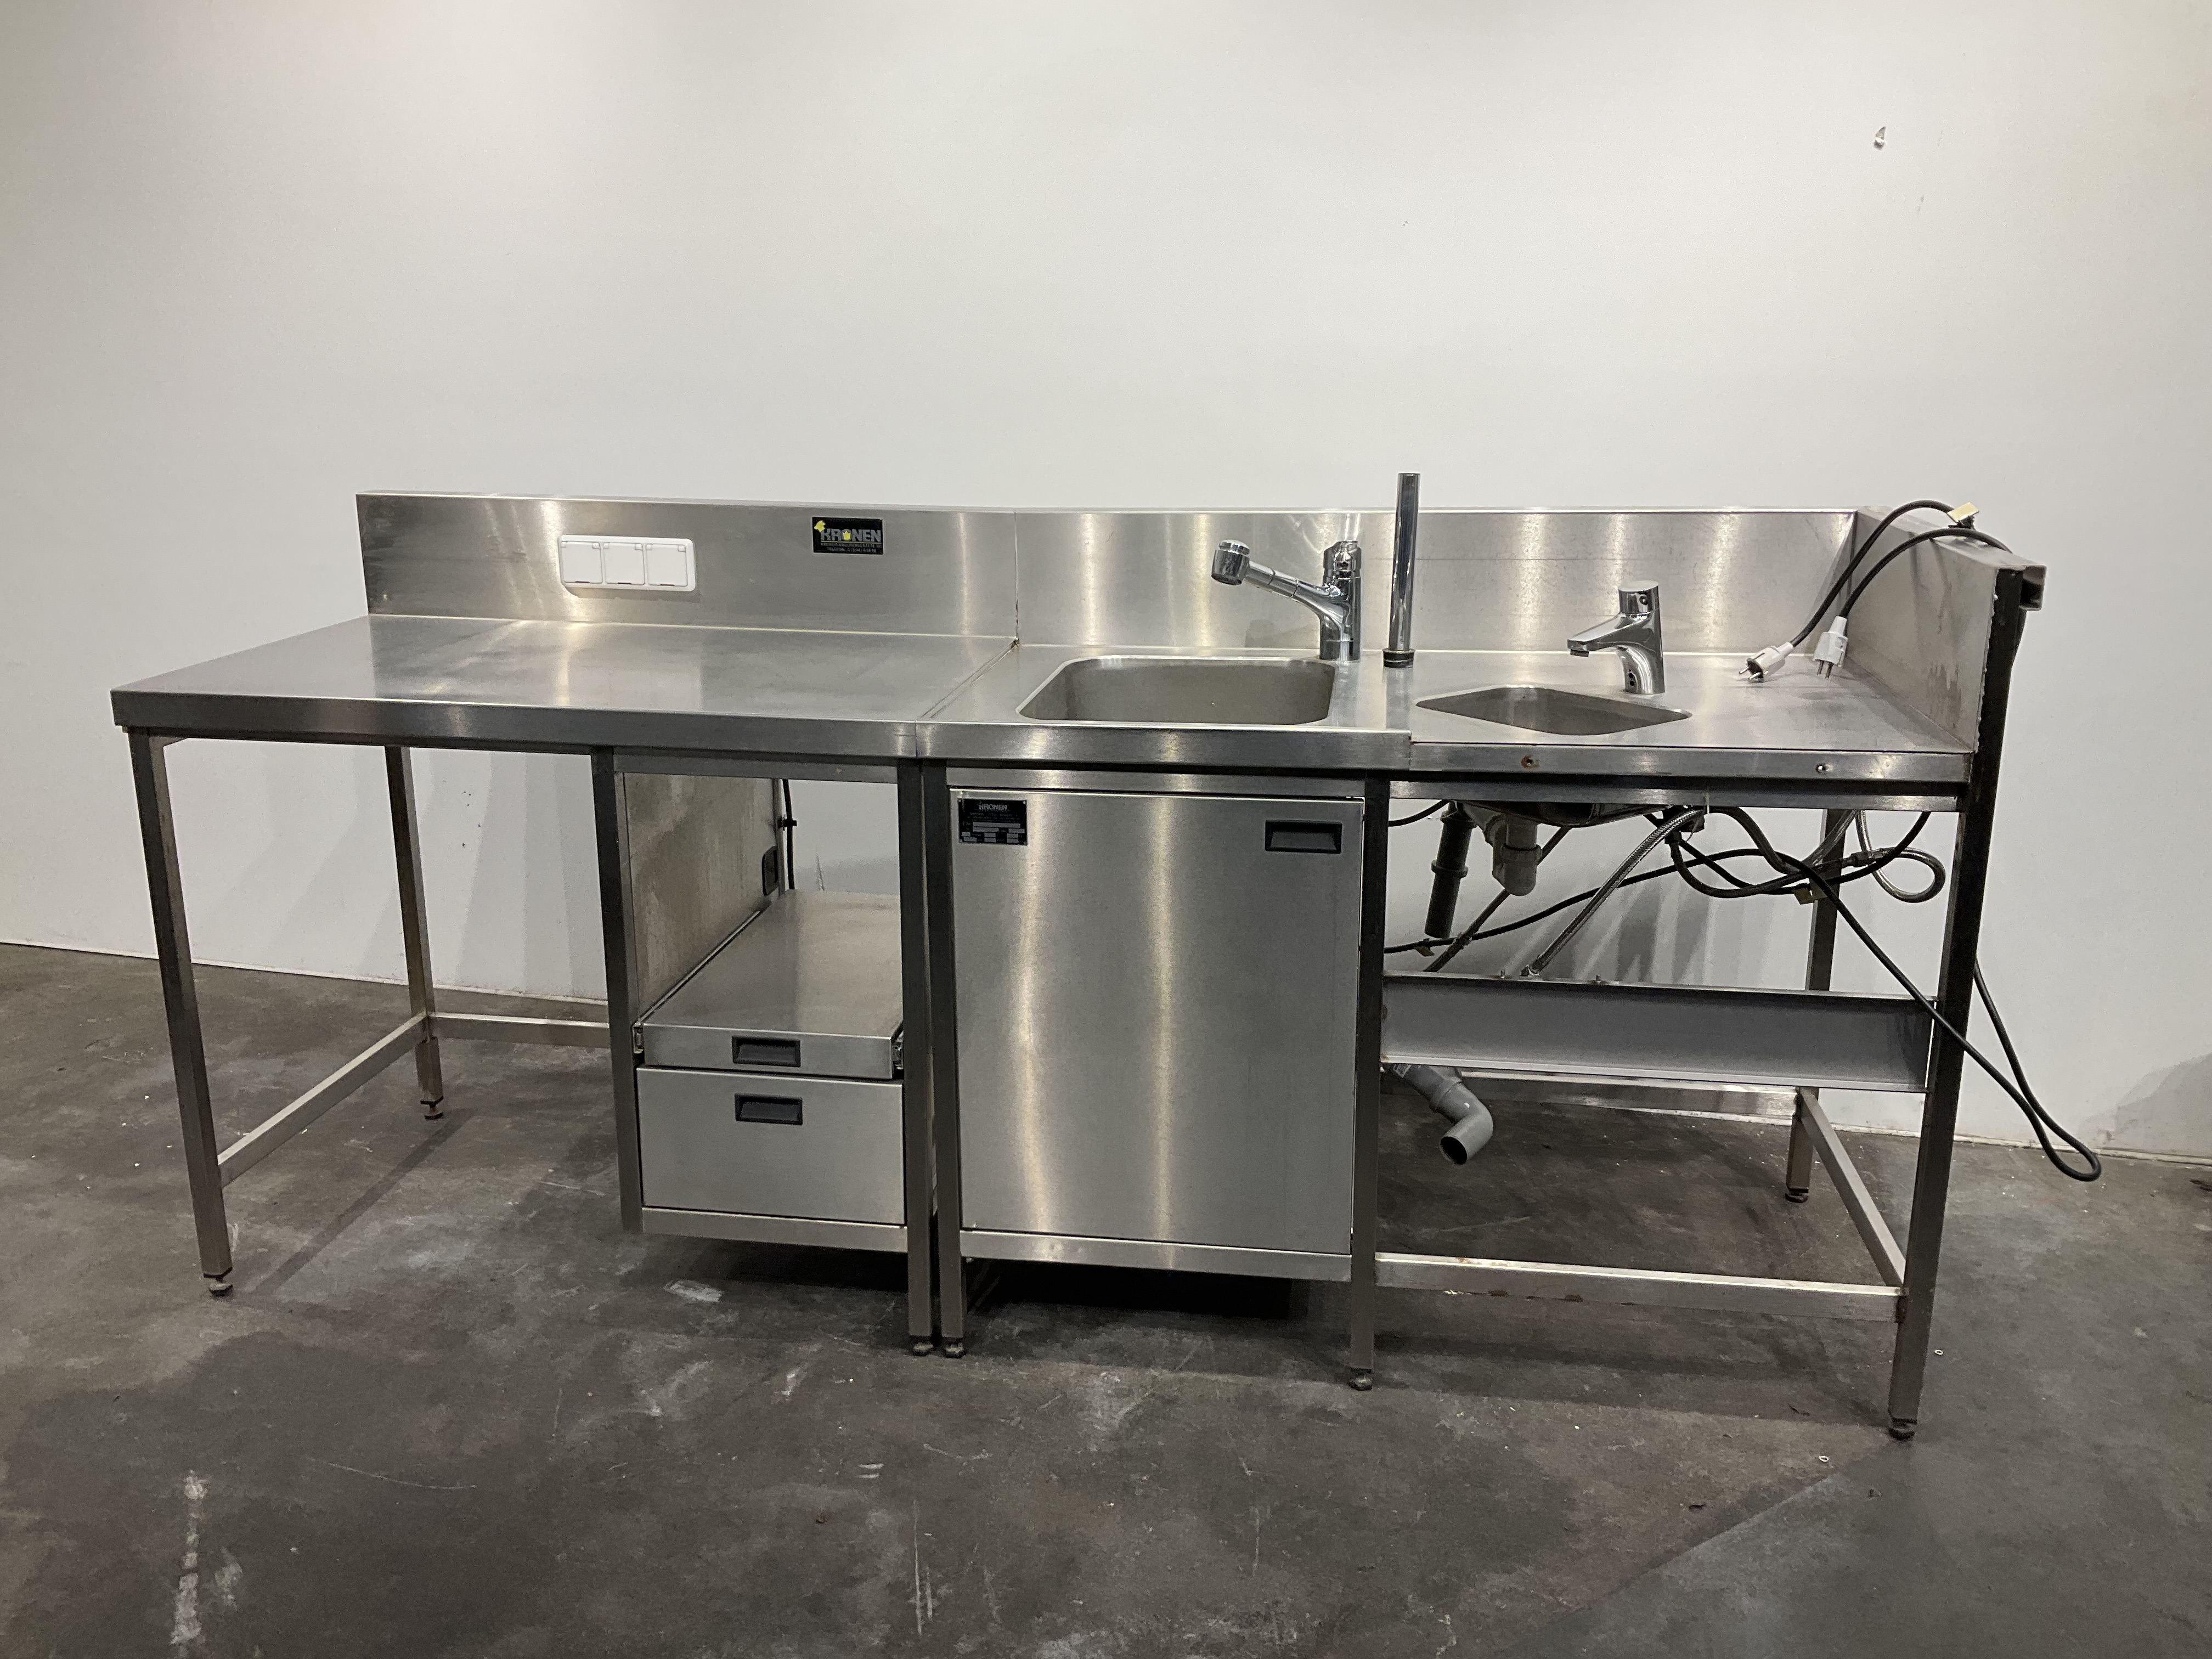 Stainless steel table with sink, used